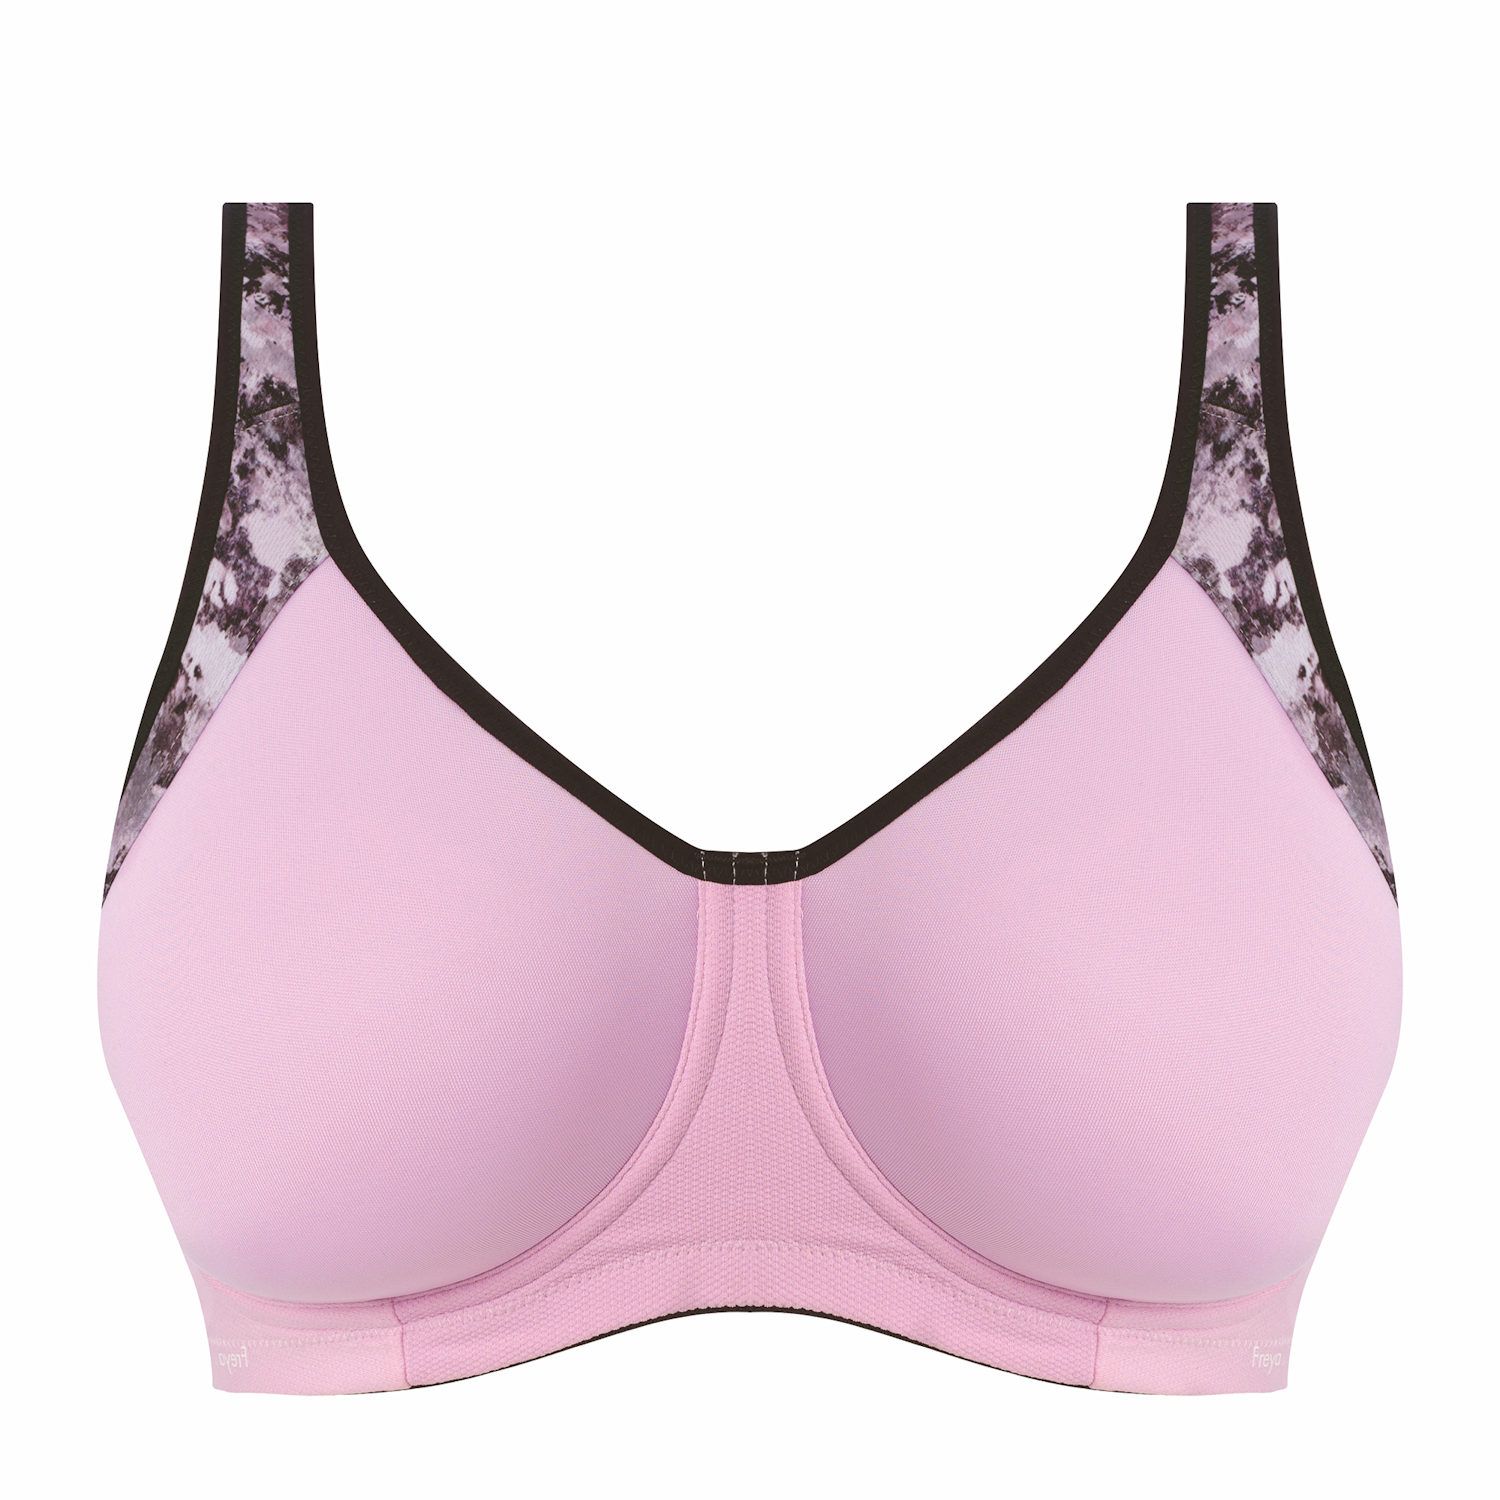 Freya Active Sonic Underwire Moulded Spacer Sports Bra 32GG Nebula